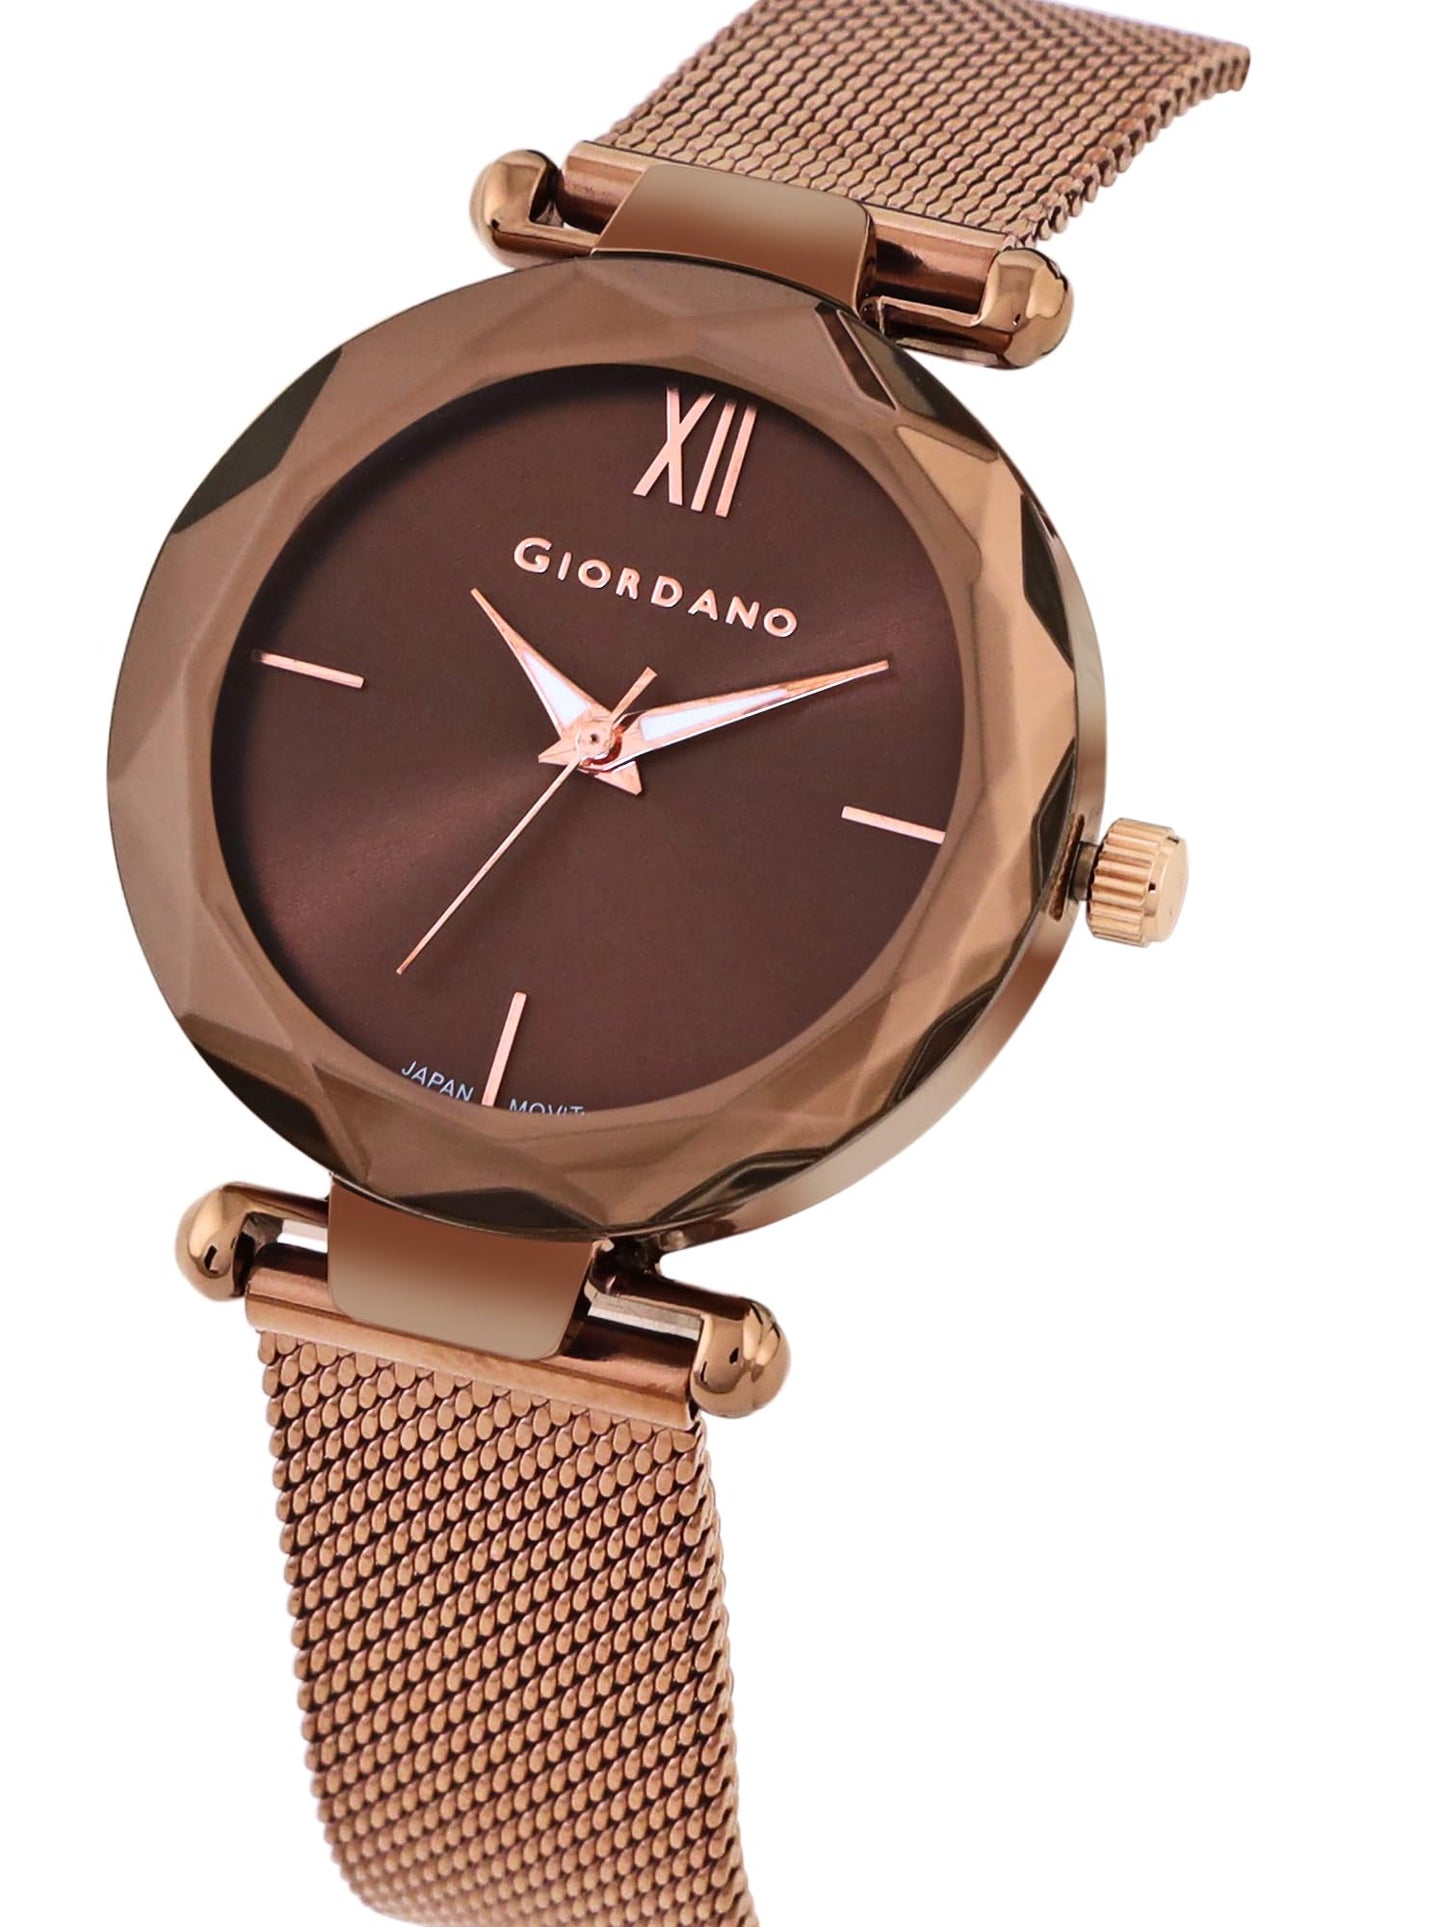 Giordano AW22 Collection Analog Watch for Women Stylish Metal Strap| 3 Hands Mechanism GZ-60042 (Brown)